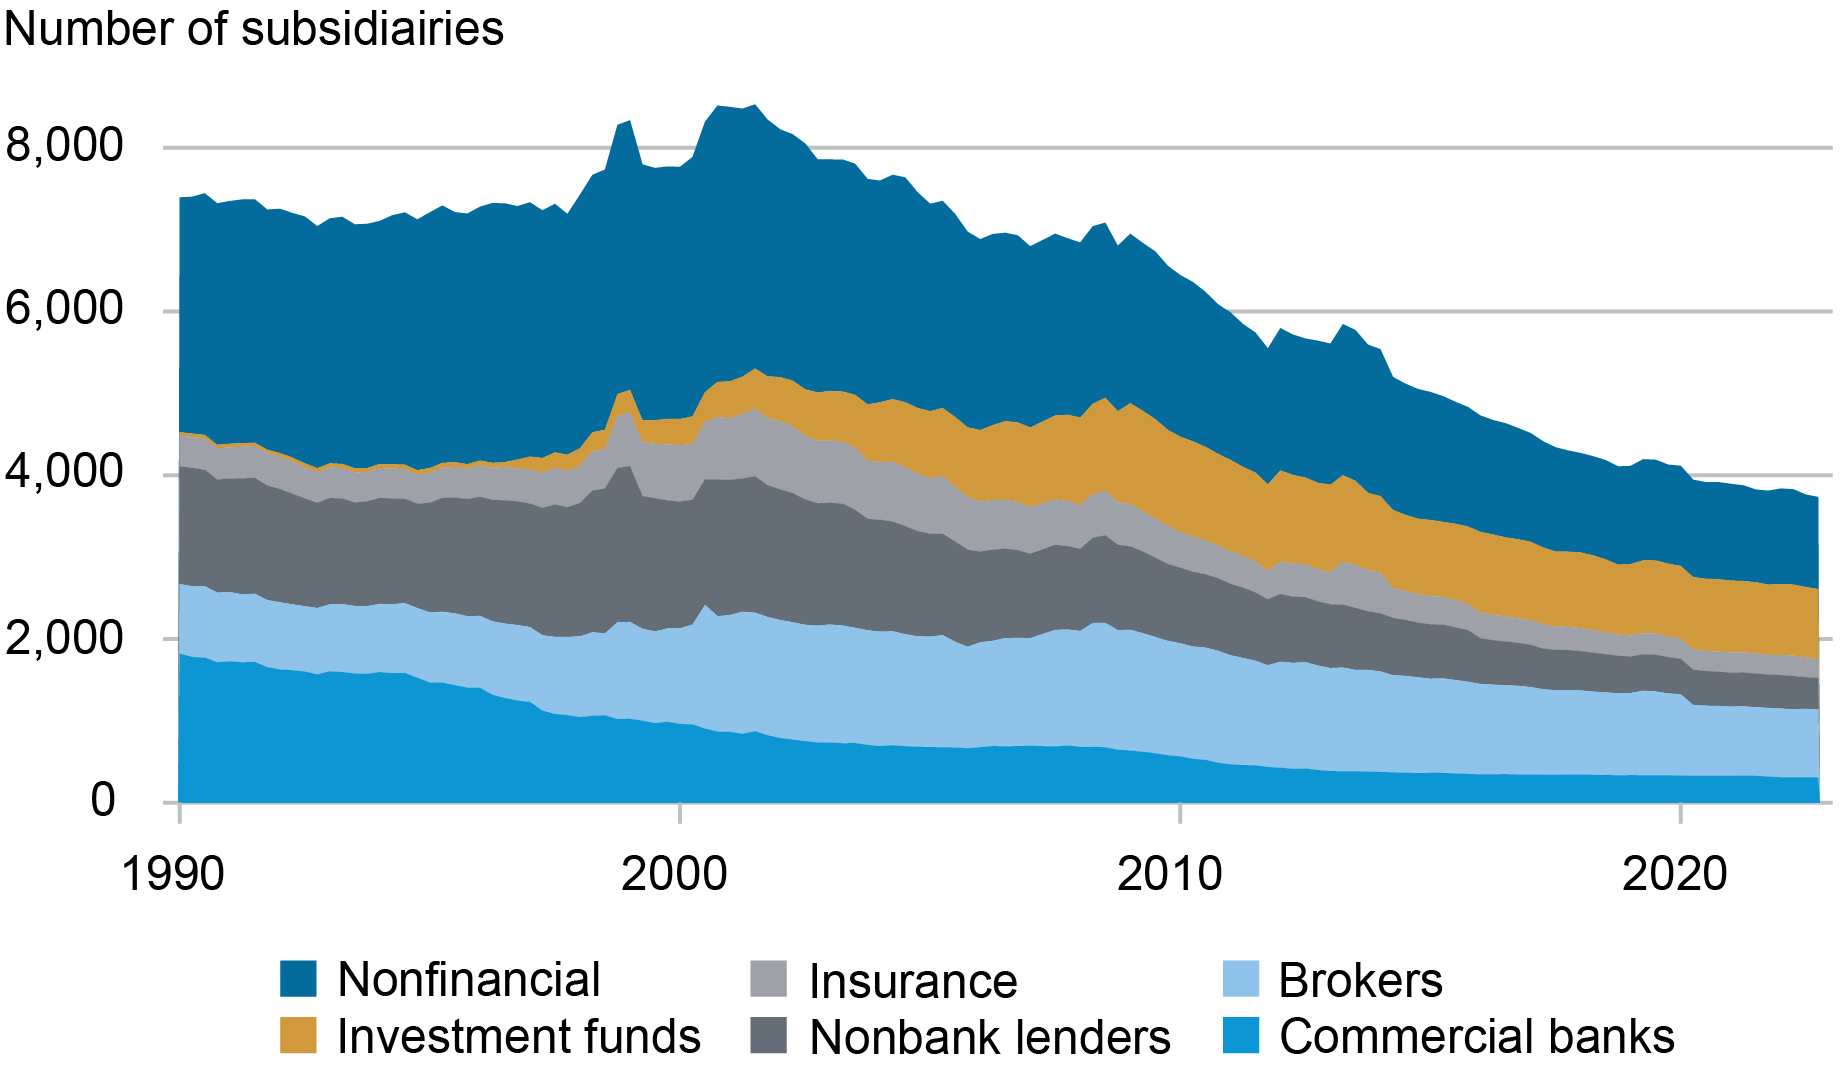 Liberty Street Economics area chart showing the composition of bank holding companies’ subsidiaries by activity.